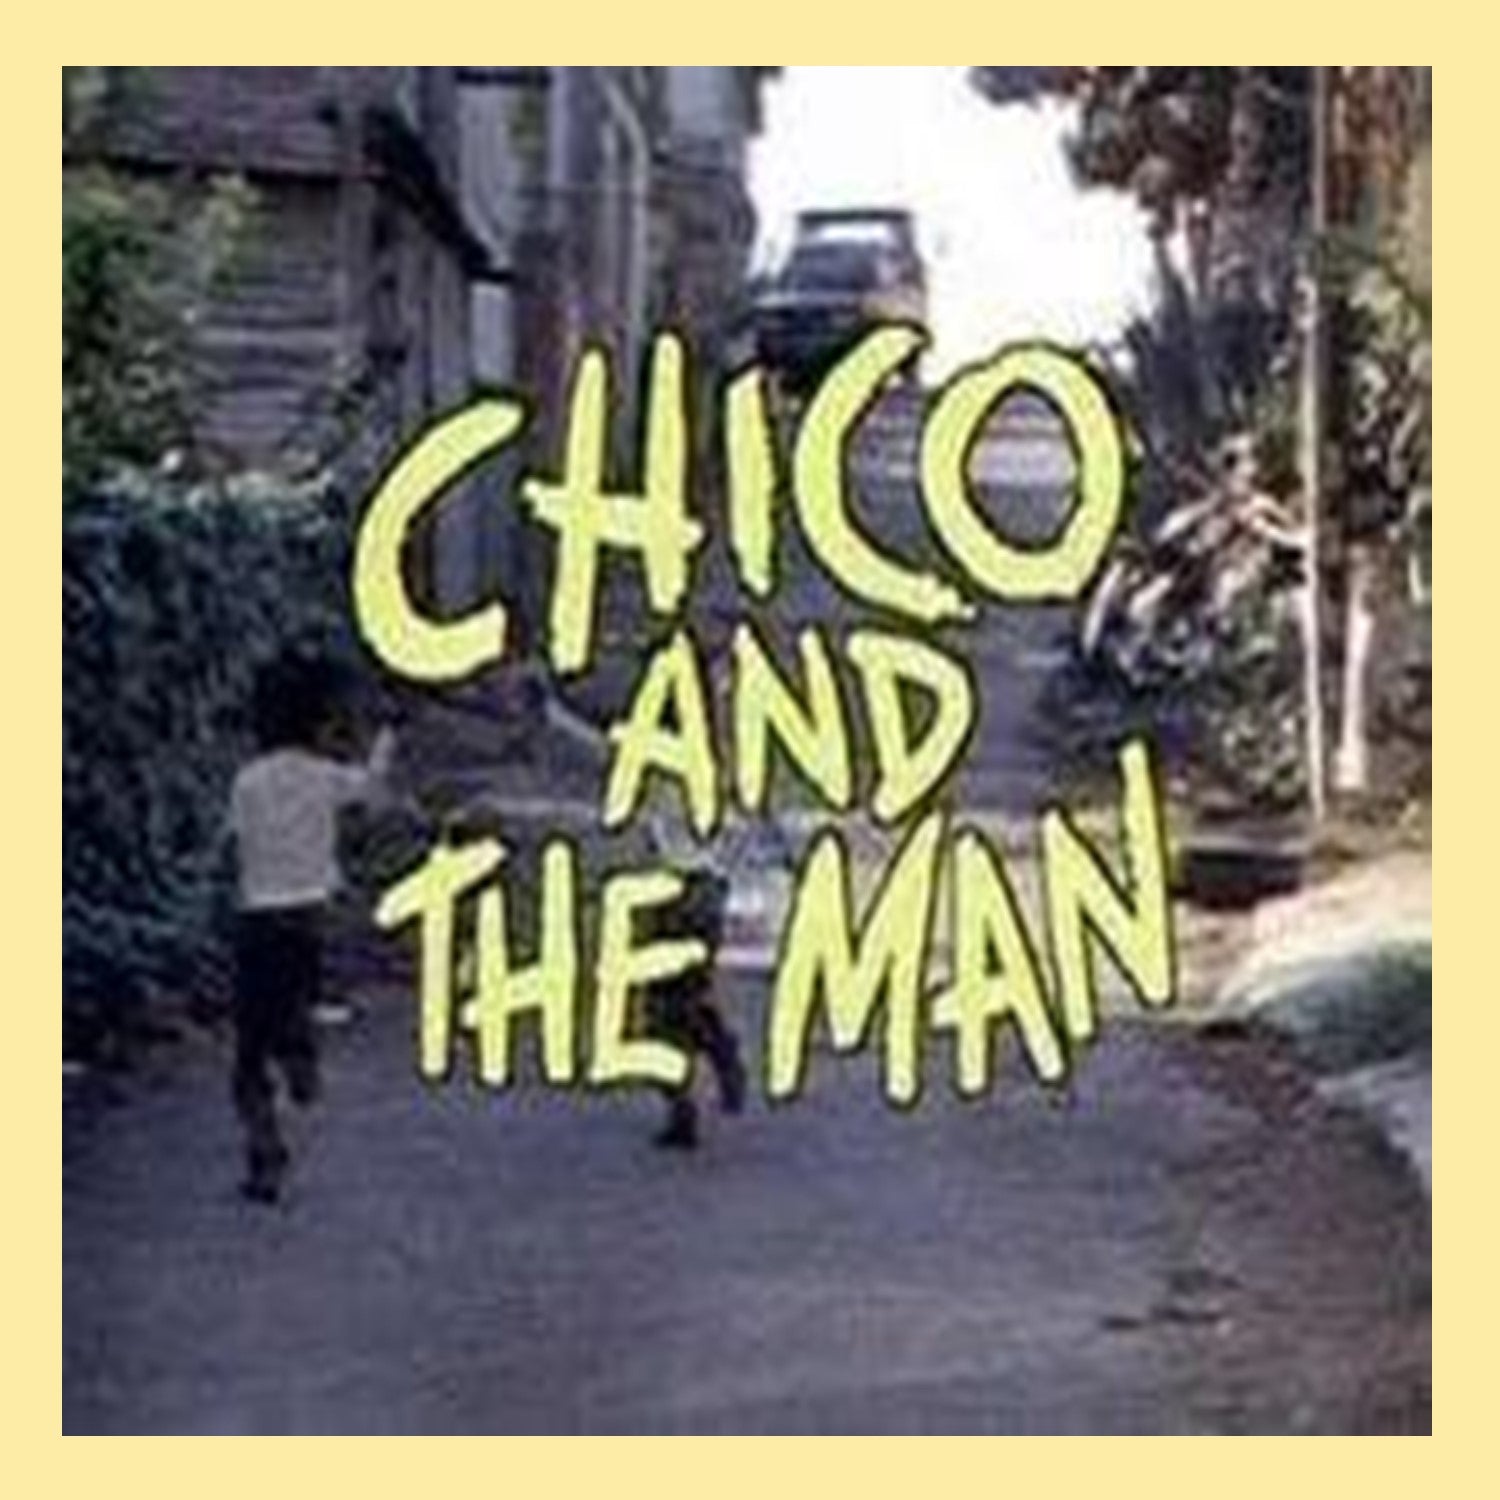 CHICO AND THE MAN - COMPLETE SERIES (NBC 1974-78) VERY RARE!!!